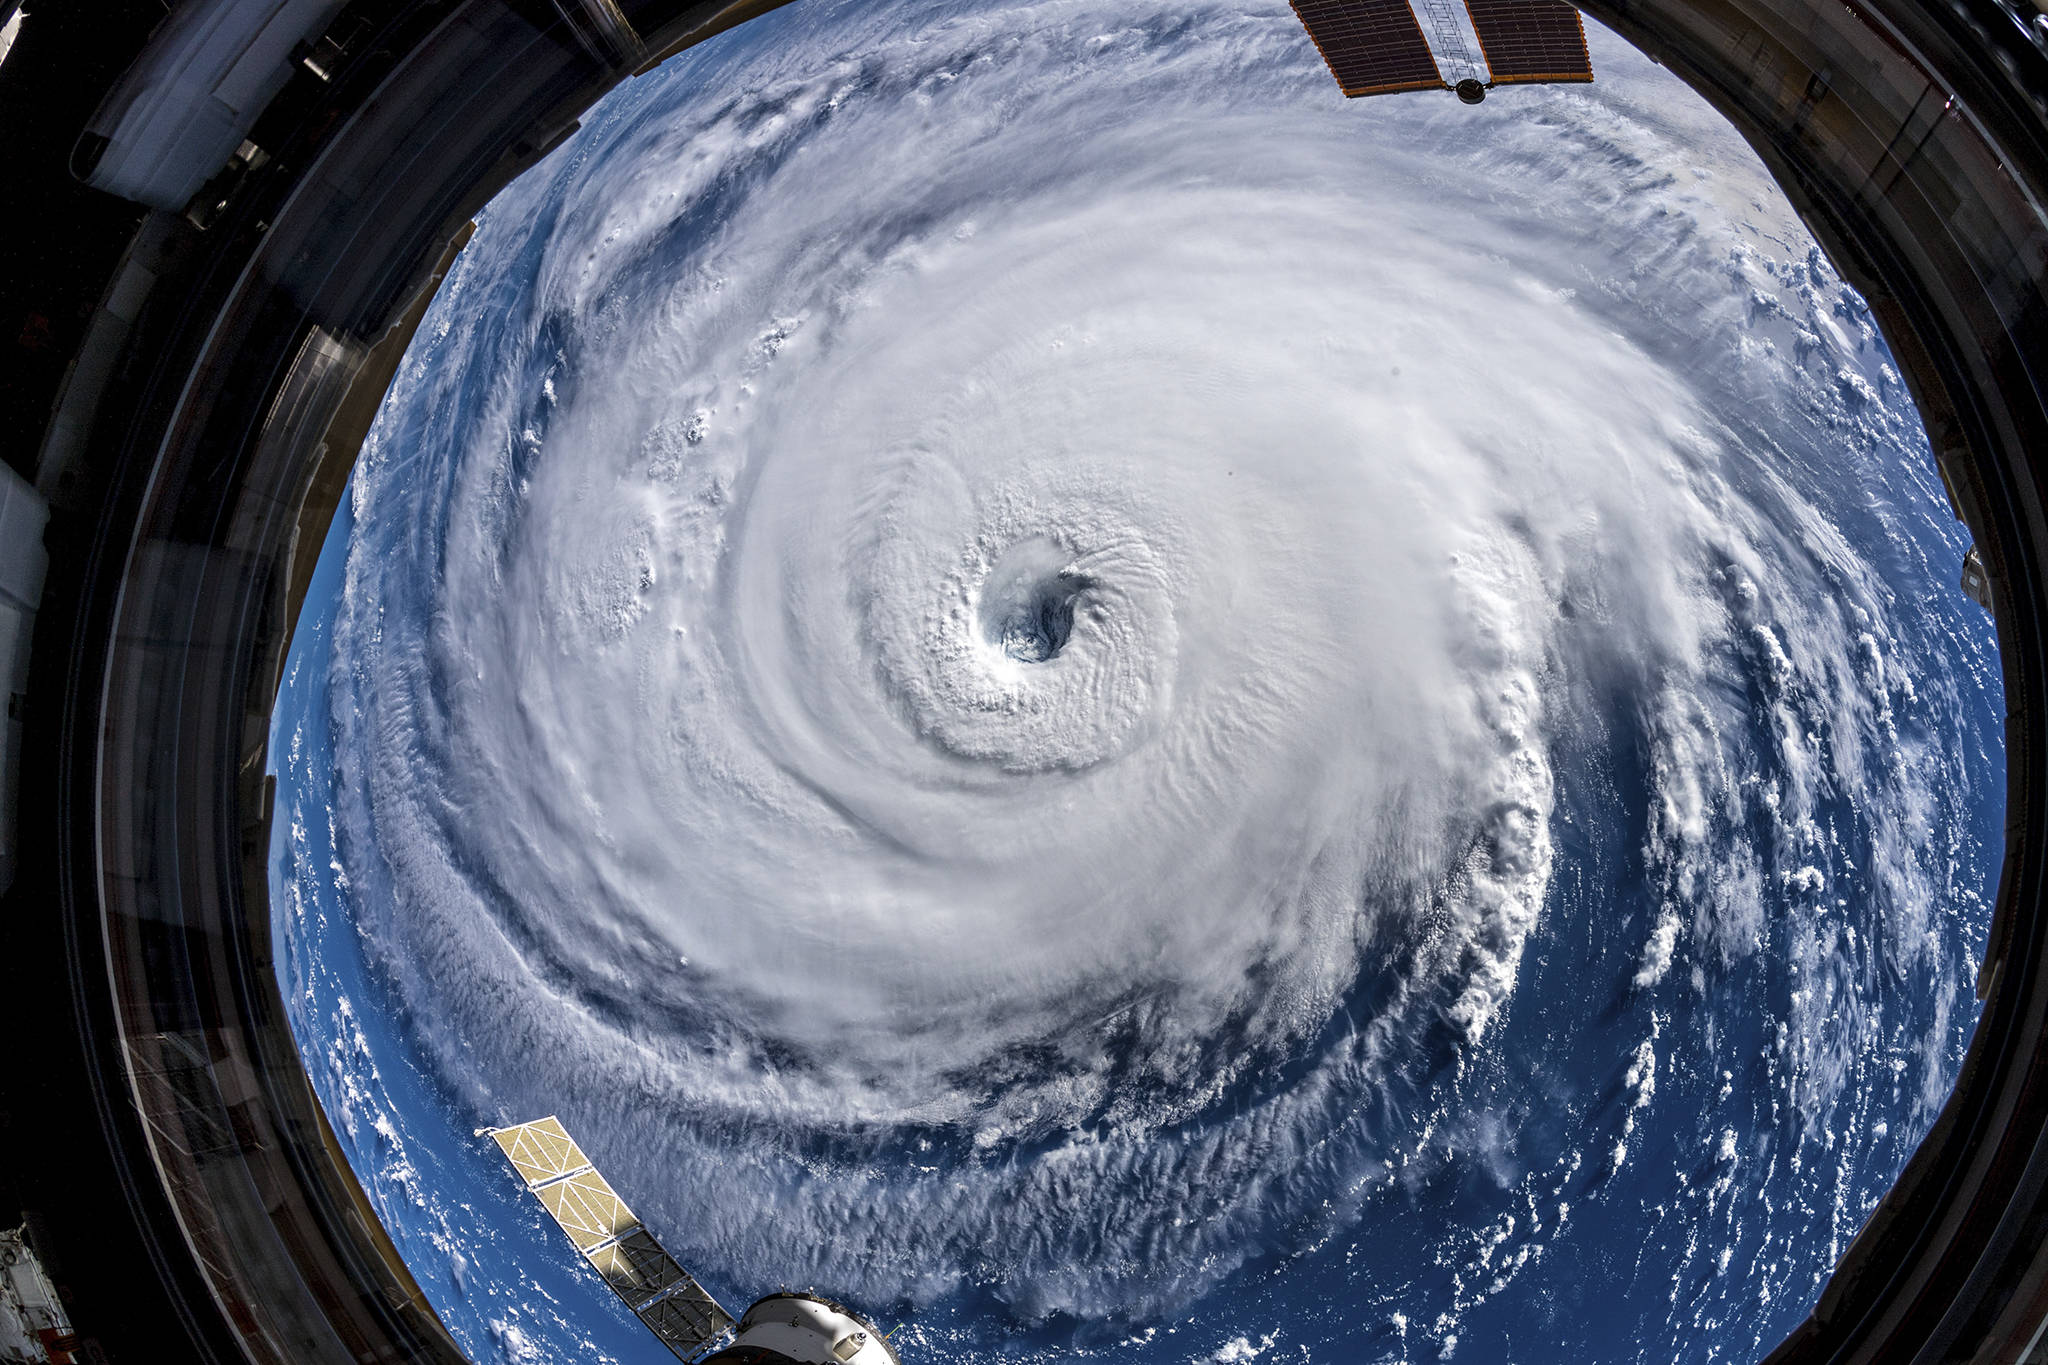 The eye of Hurricane Florence is seen from the International Space Station. (Alexander Gerst/NASA)